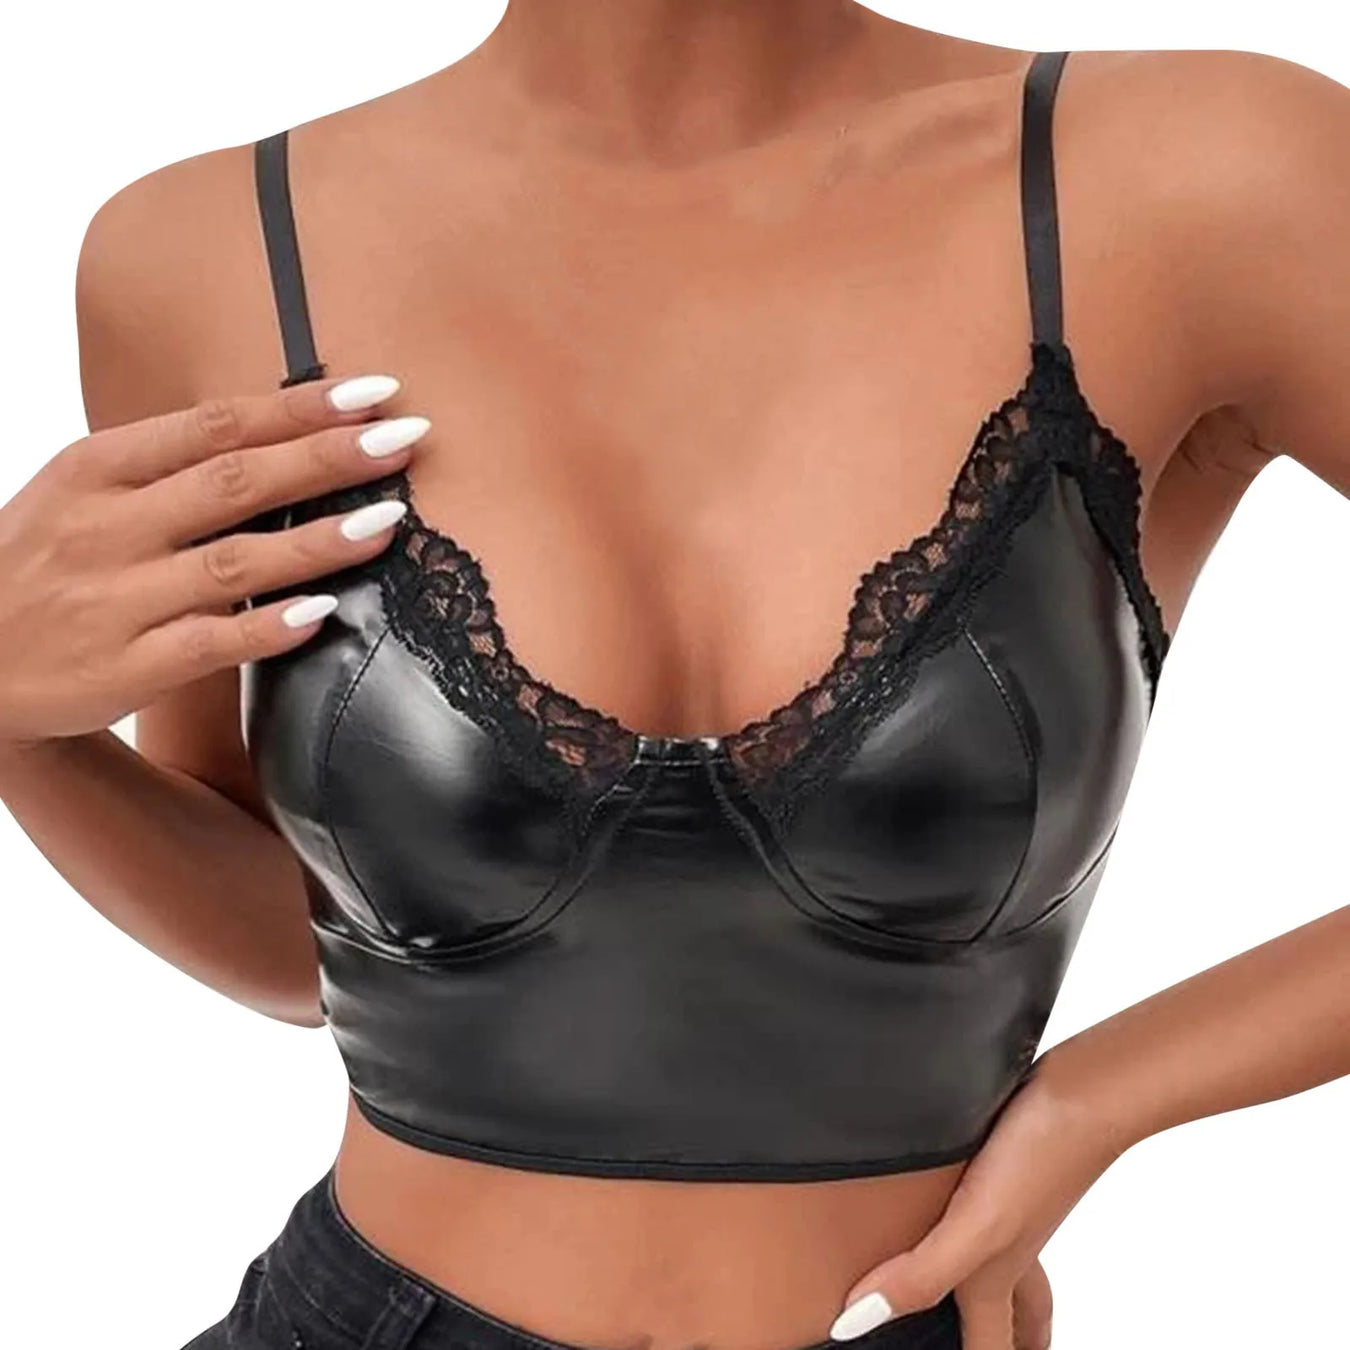 Sultry Lace and Leather Bullet Cup Bra - Elegant Unlined Lingerie